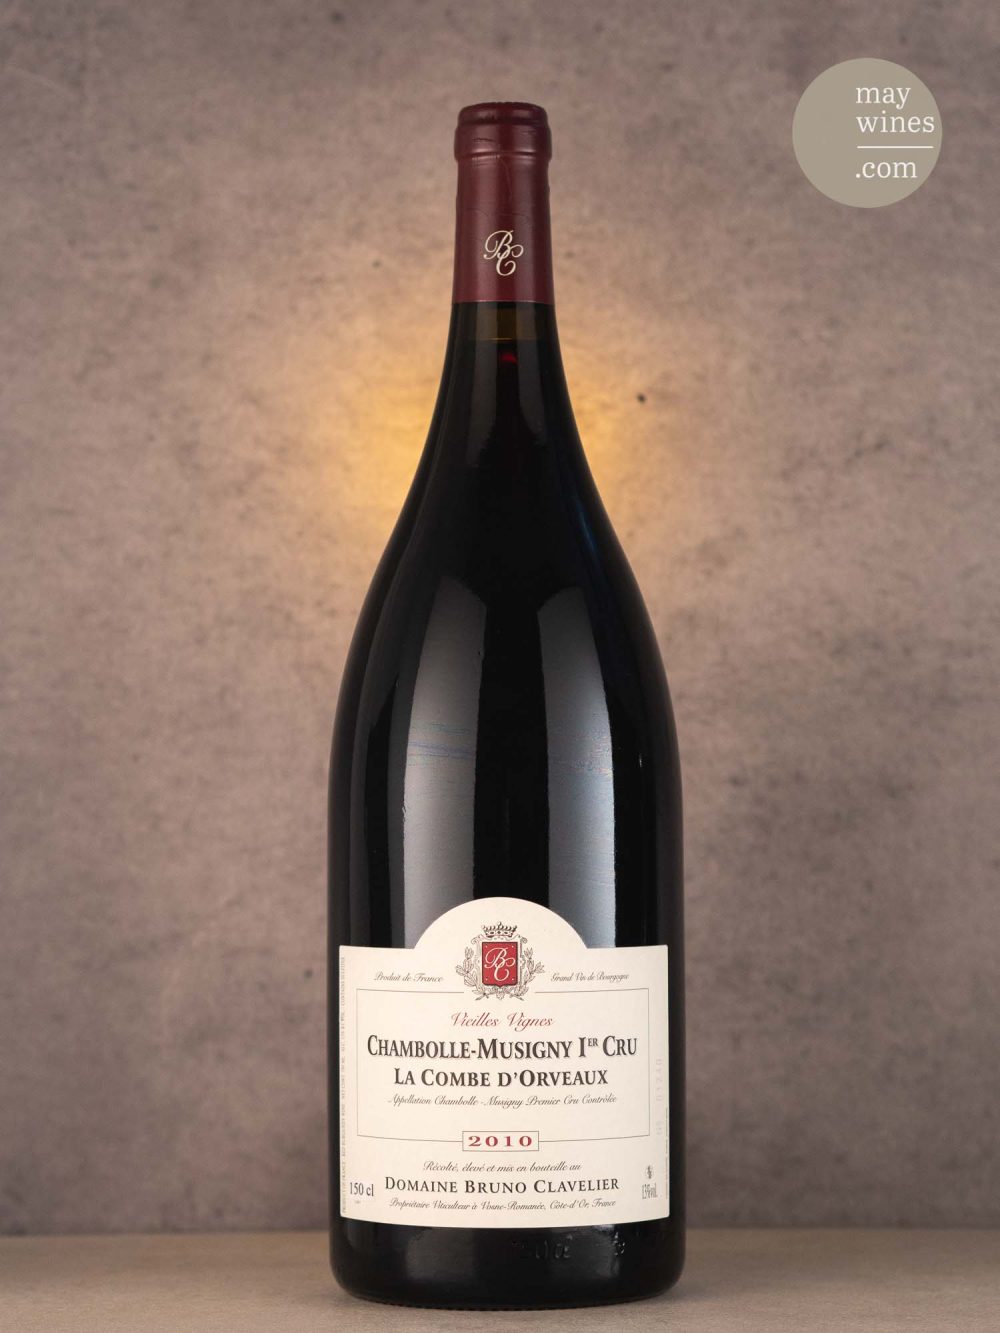 May Wines – Rotwein – 2010 Chambolle-Musigny La Combe d'Orveaux V. V. Premier Cru - Domaine Bruno Clavelier